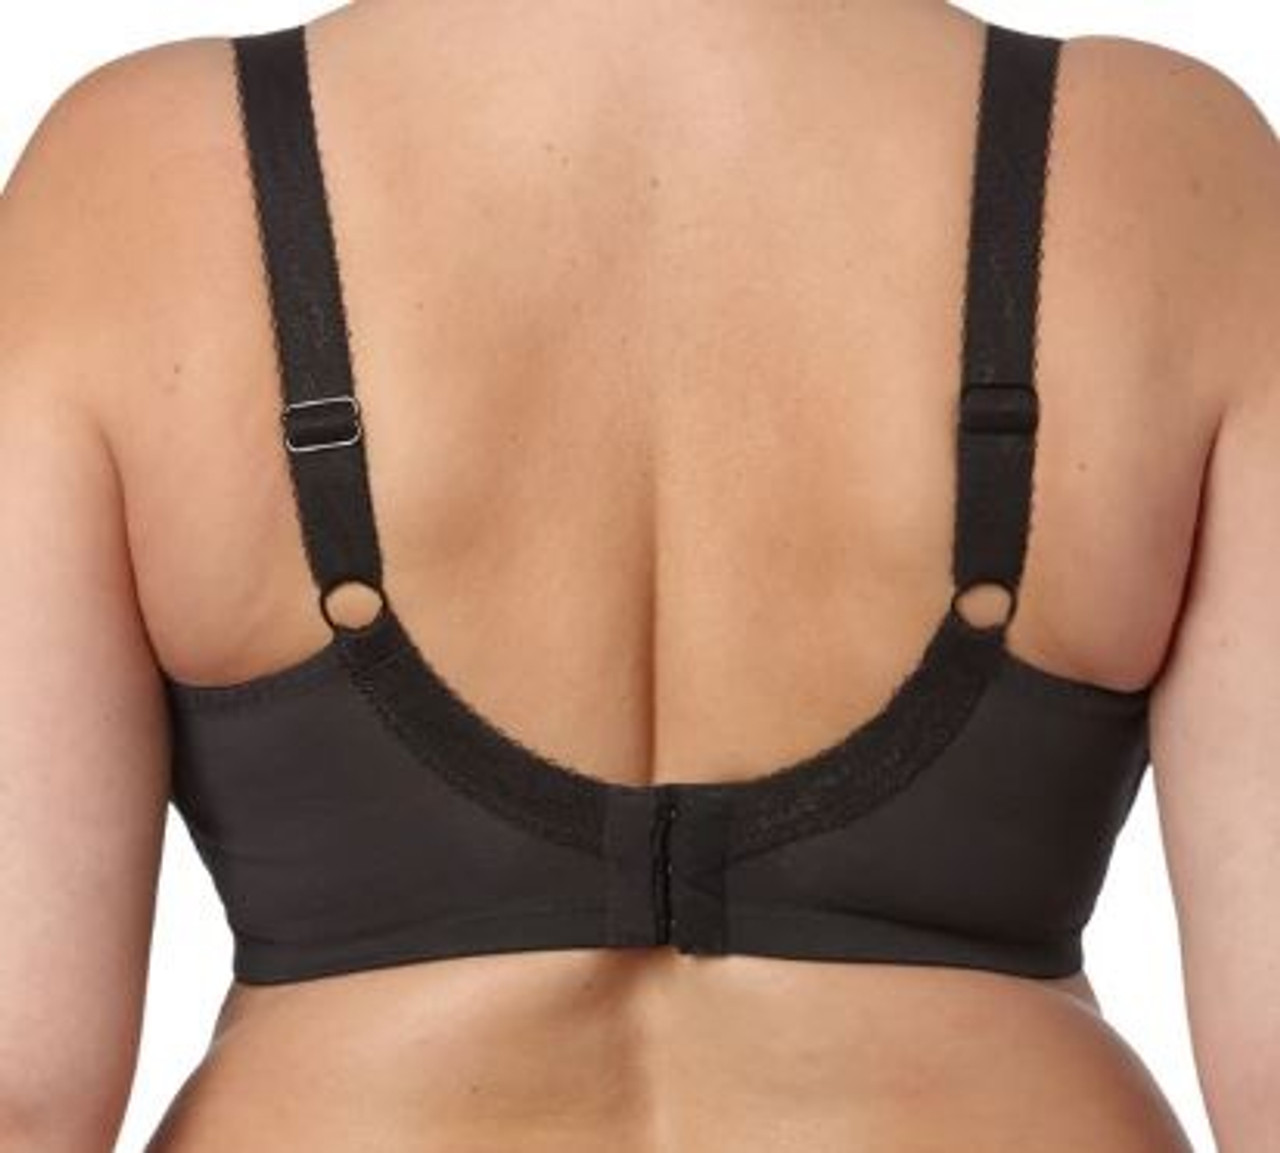 Goddess Adelaide Underwire Full Cup Bra in Black - Busted Bra Shop